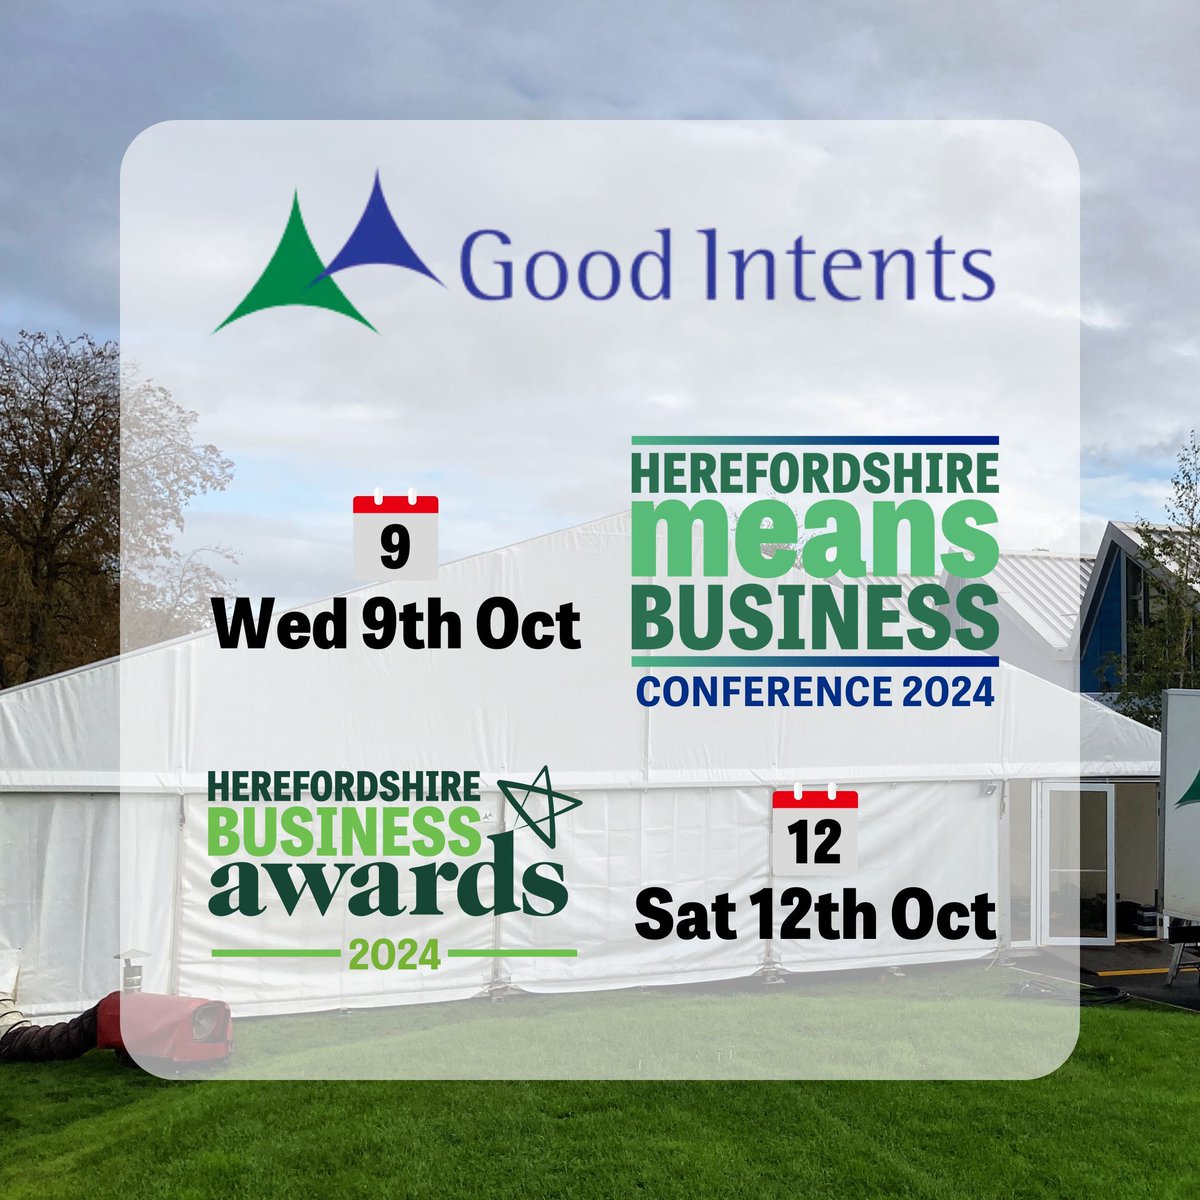 Have you seen our Big Announcement? 🚨

This year's #HMBiz Conference AND #HereBA 2024 will take place inside our beautiful marquee - courtesy of @goodintents 💚

#hereford #herefordshire #businessconference #businessawards